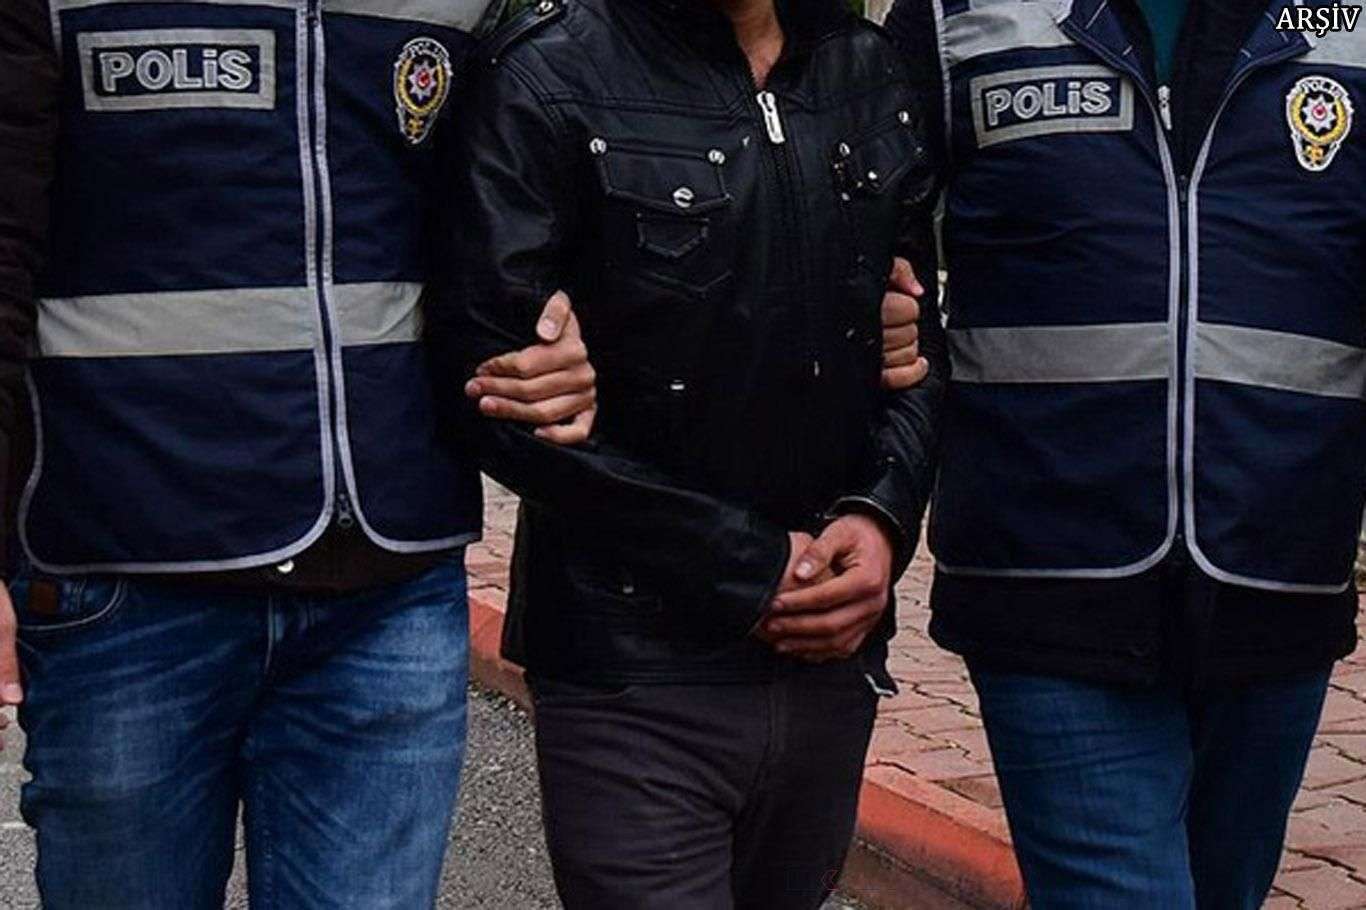 Turkey issues arrest warrants for 33 ISIS suspects